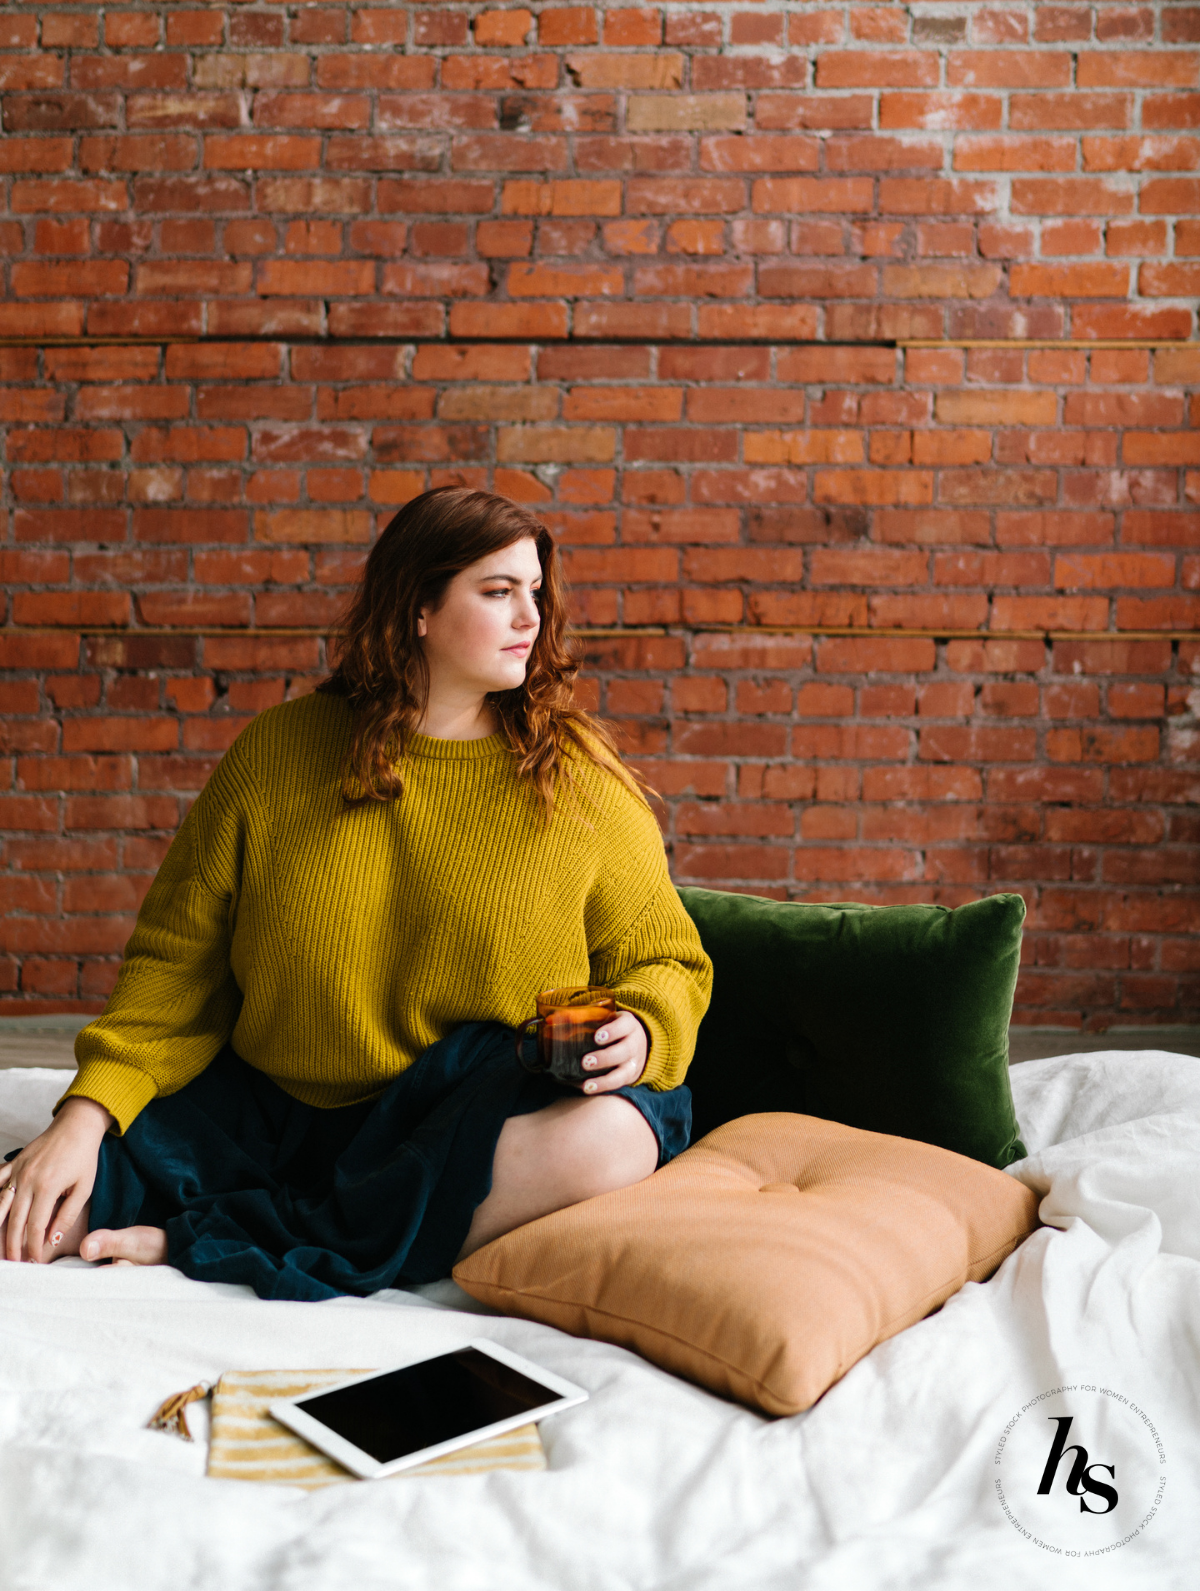 Urban Loft interior design, lifestyle and workspace stock photos. Plus size model in stock photography images from Haute Stock. Body diversity and body positivity stock photos for women entrepreneurs and bloggers.